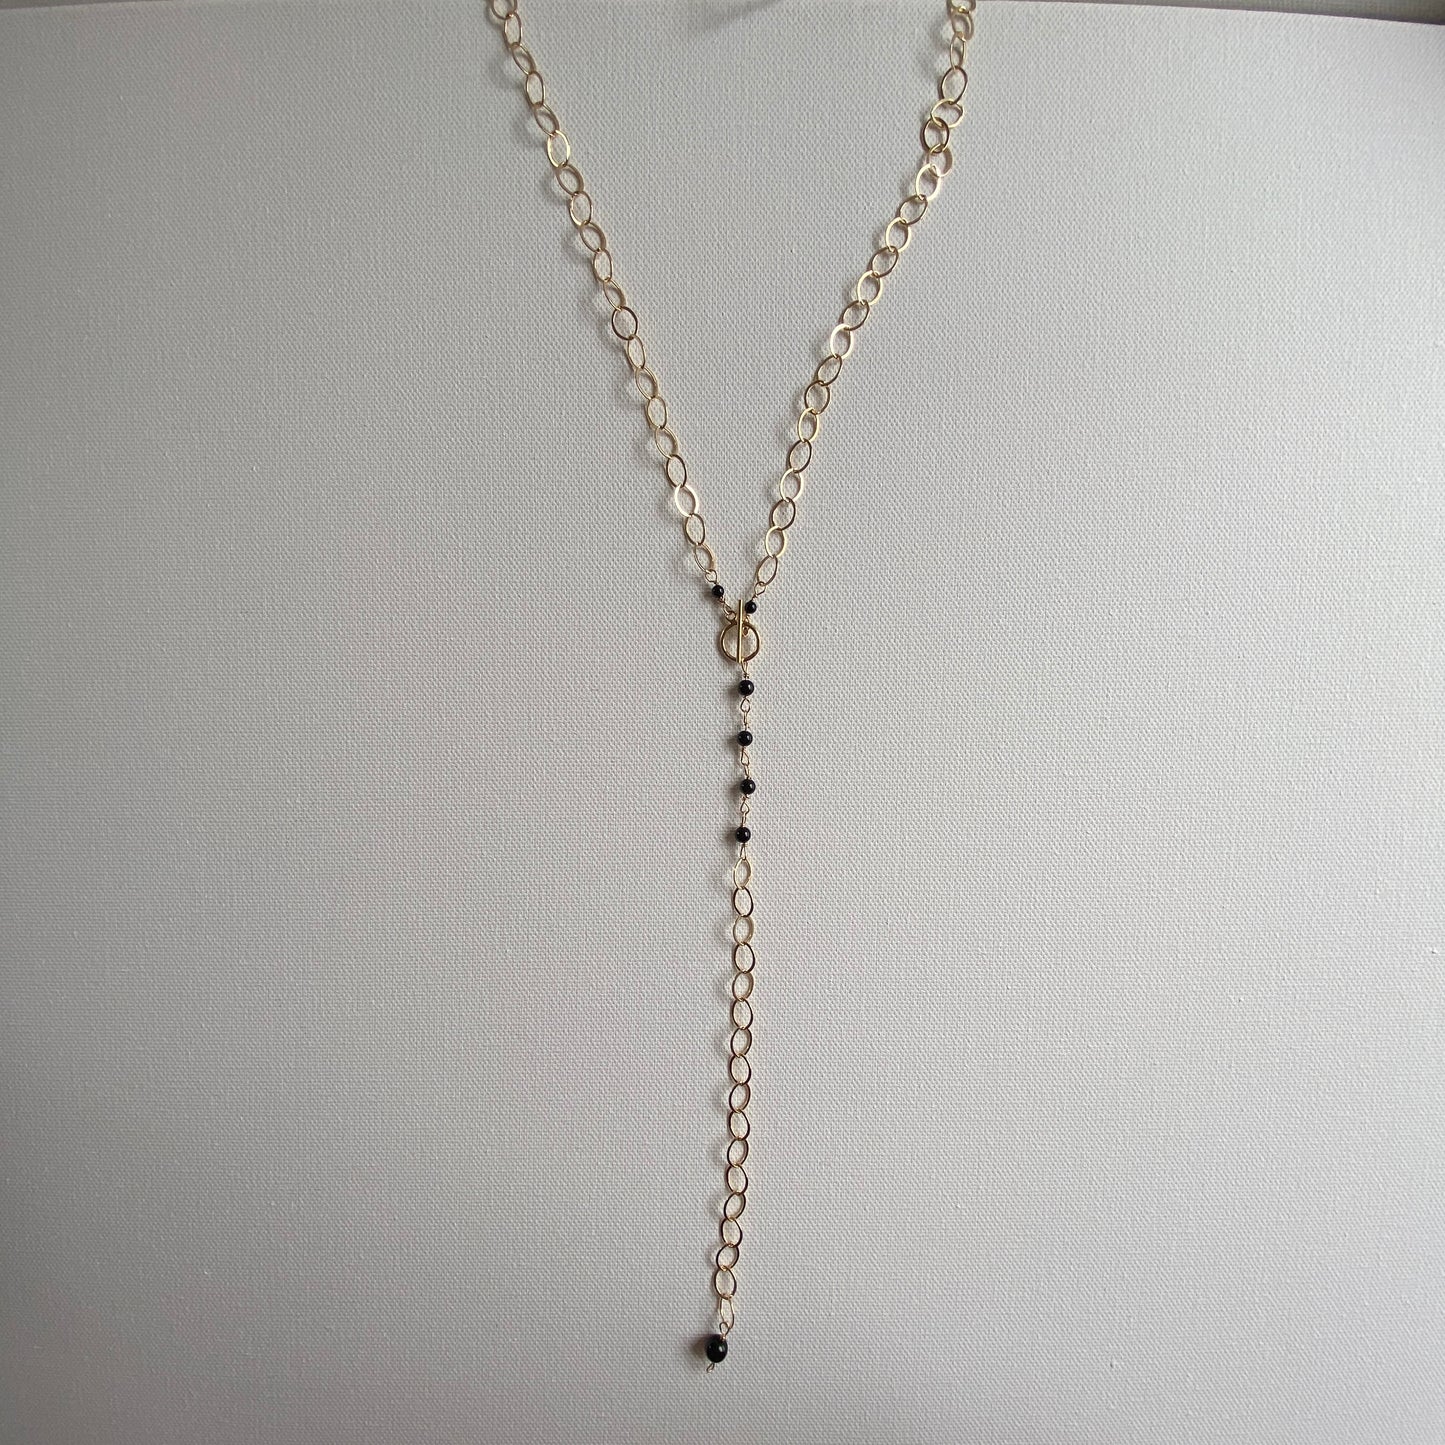 Gold, Beaded, Crystal, Lariat, Toggle, Long Necklace